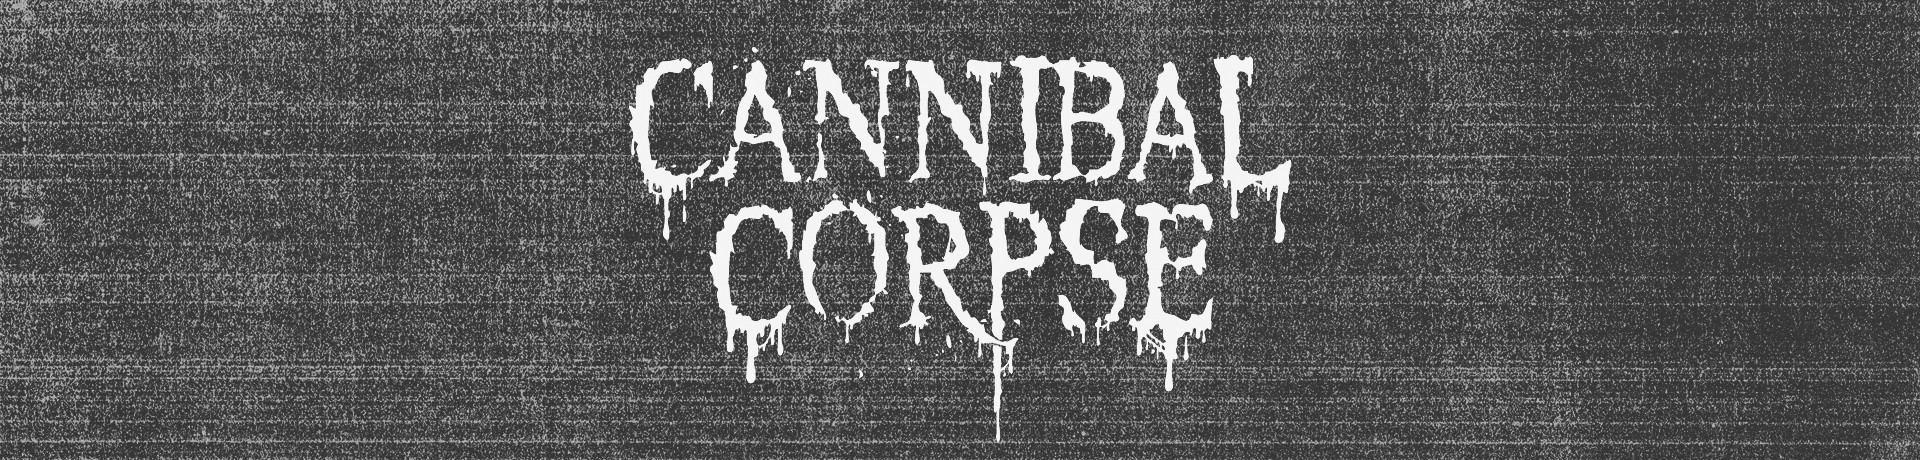 Cannibal Corpse - Skull Sketch